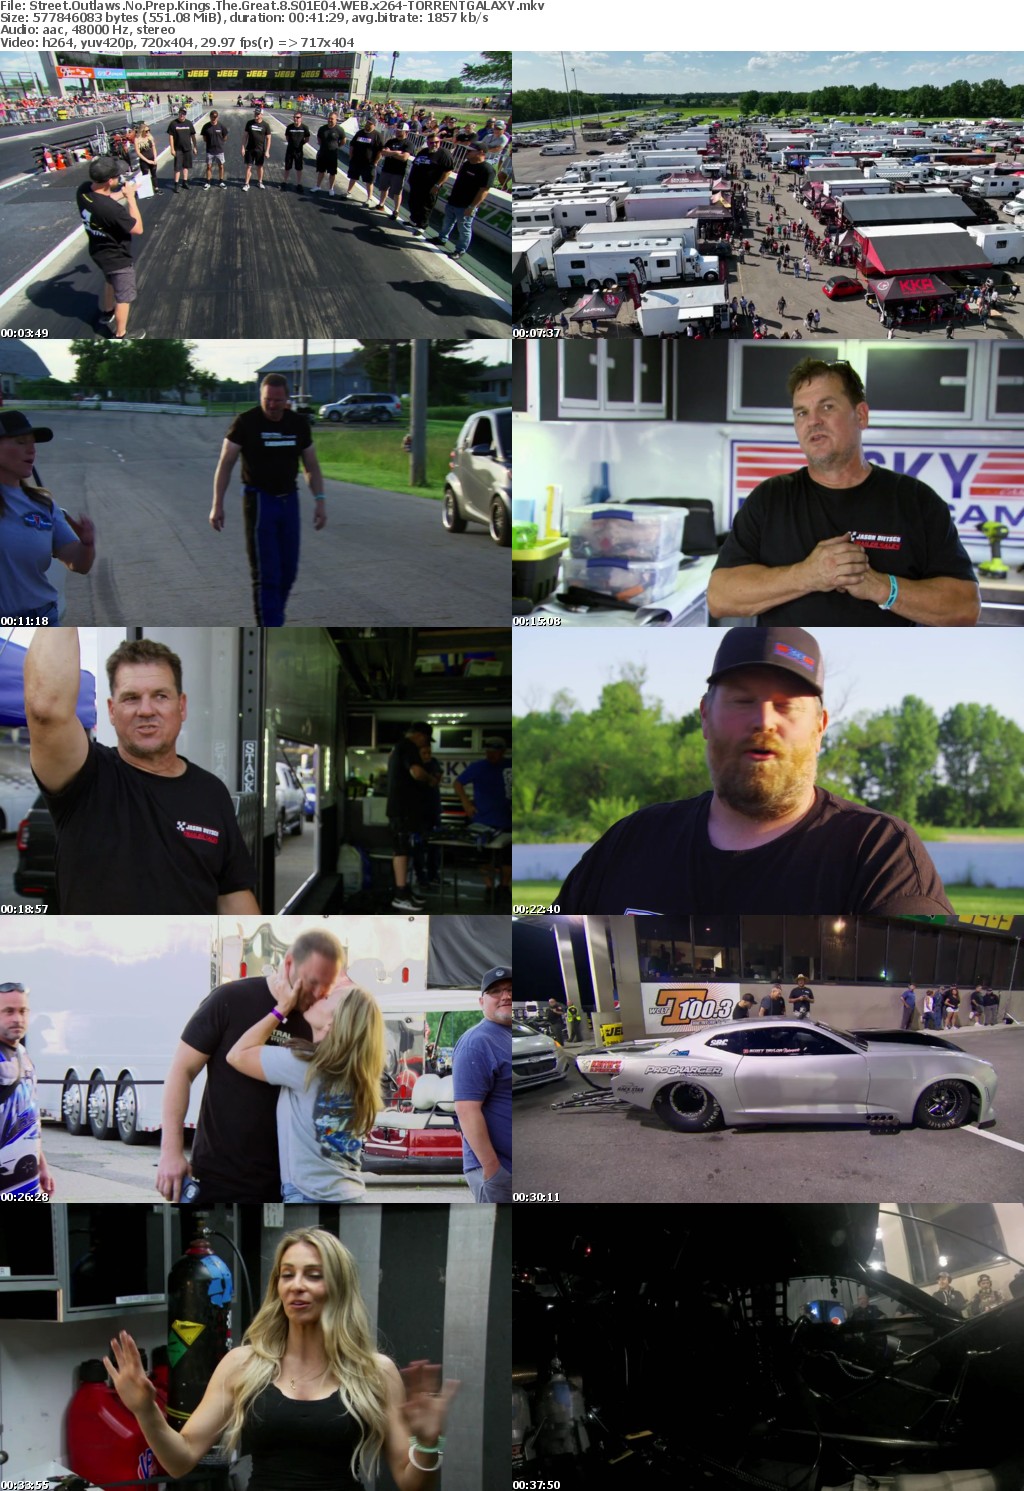 Street Outlaws No Prep Kings The Great 8 S01E04 WEB x264-GALAXY